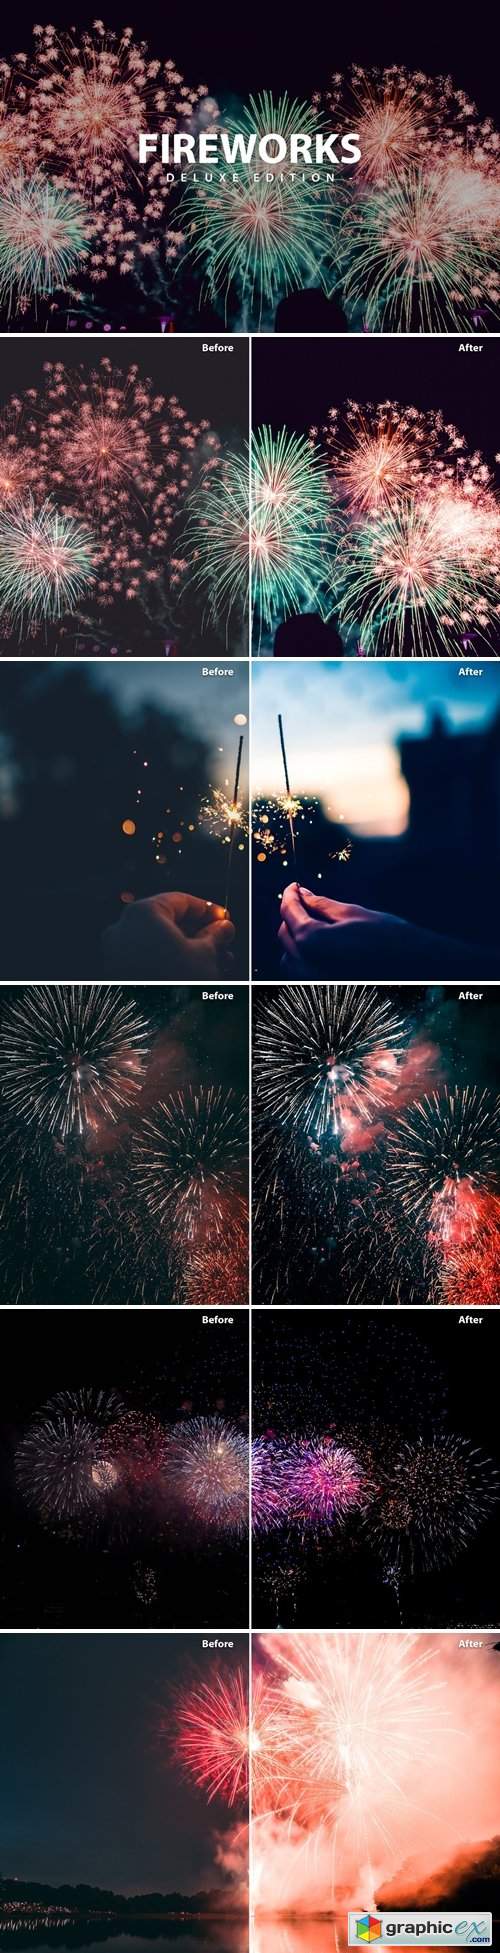  Fireworks Deluxe Edition | for Mobile and Desktop 